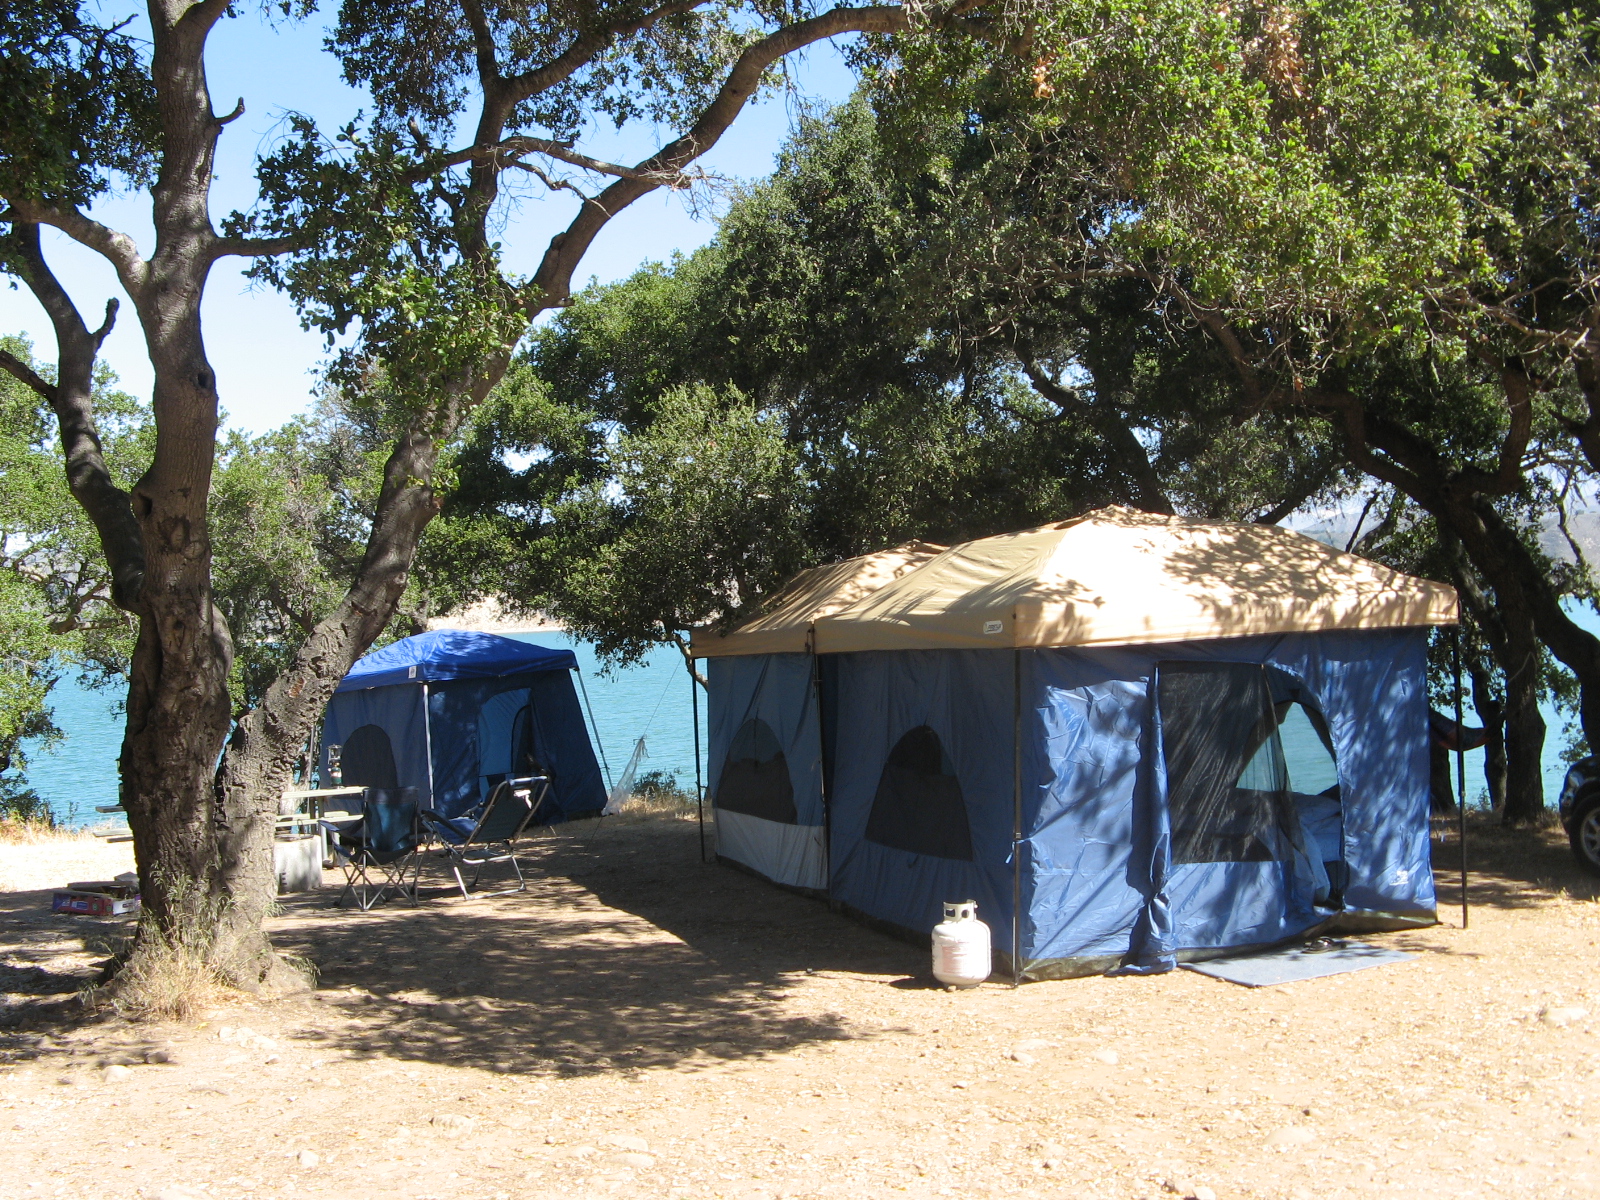 Standing Room Tent compound